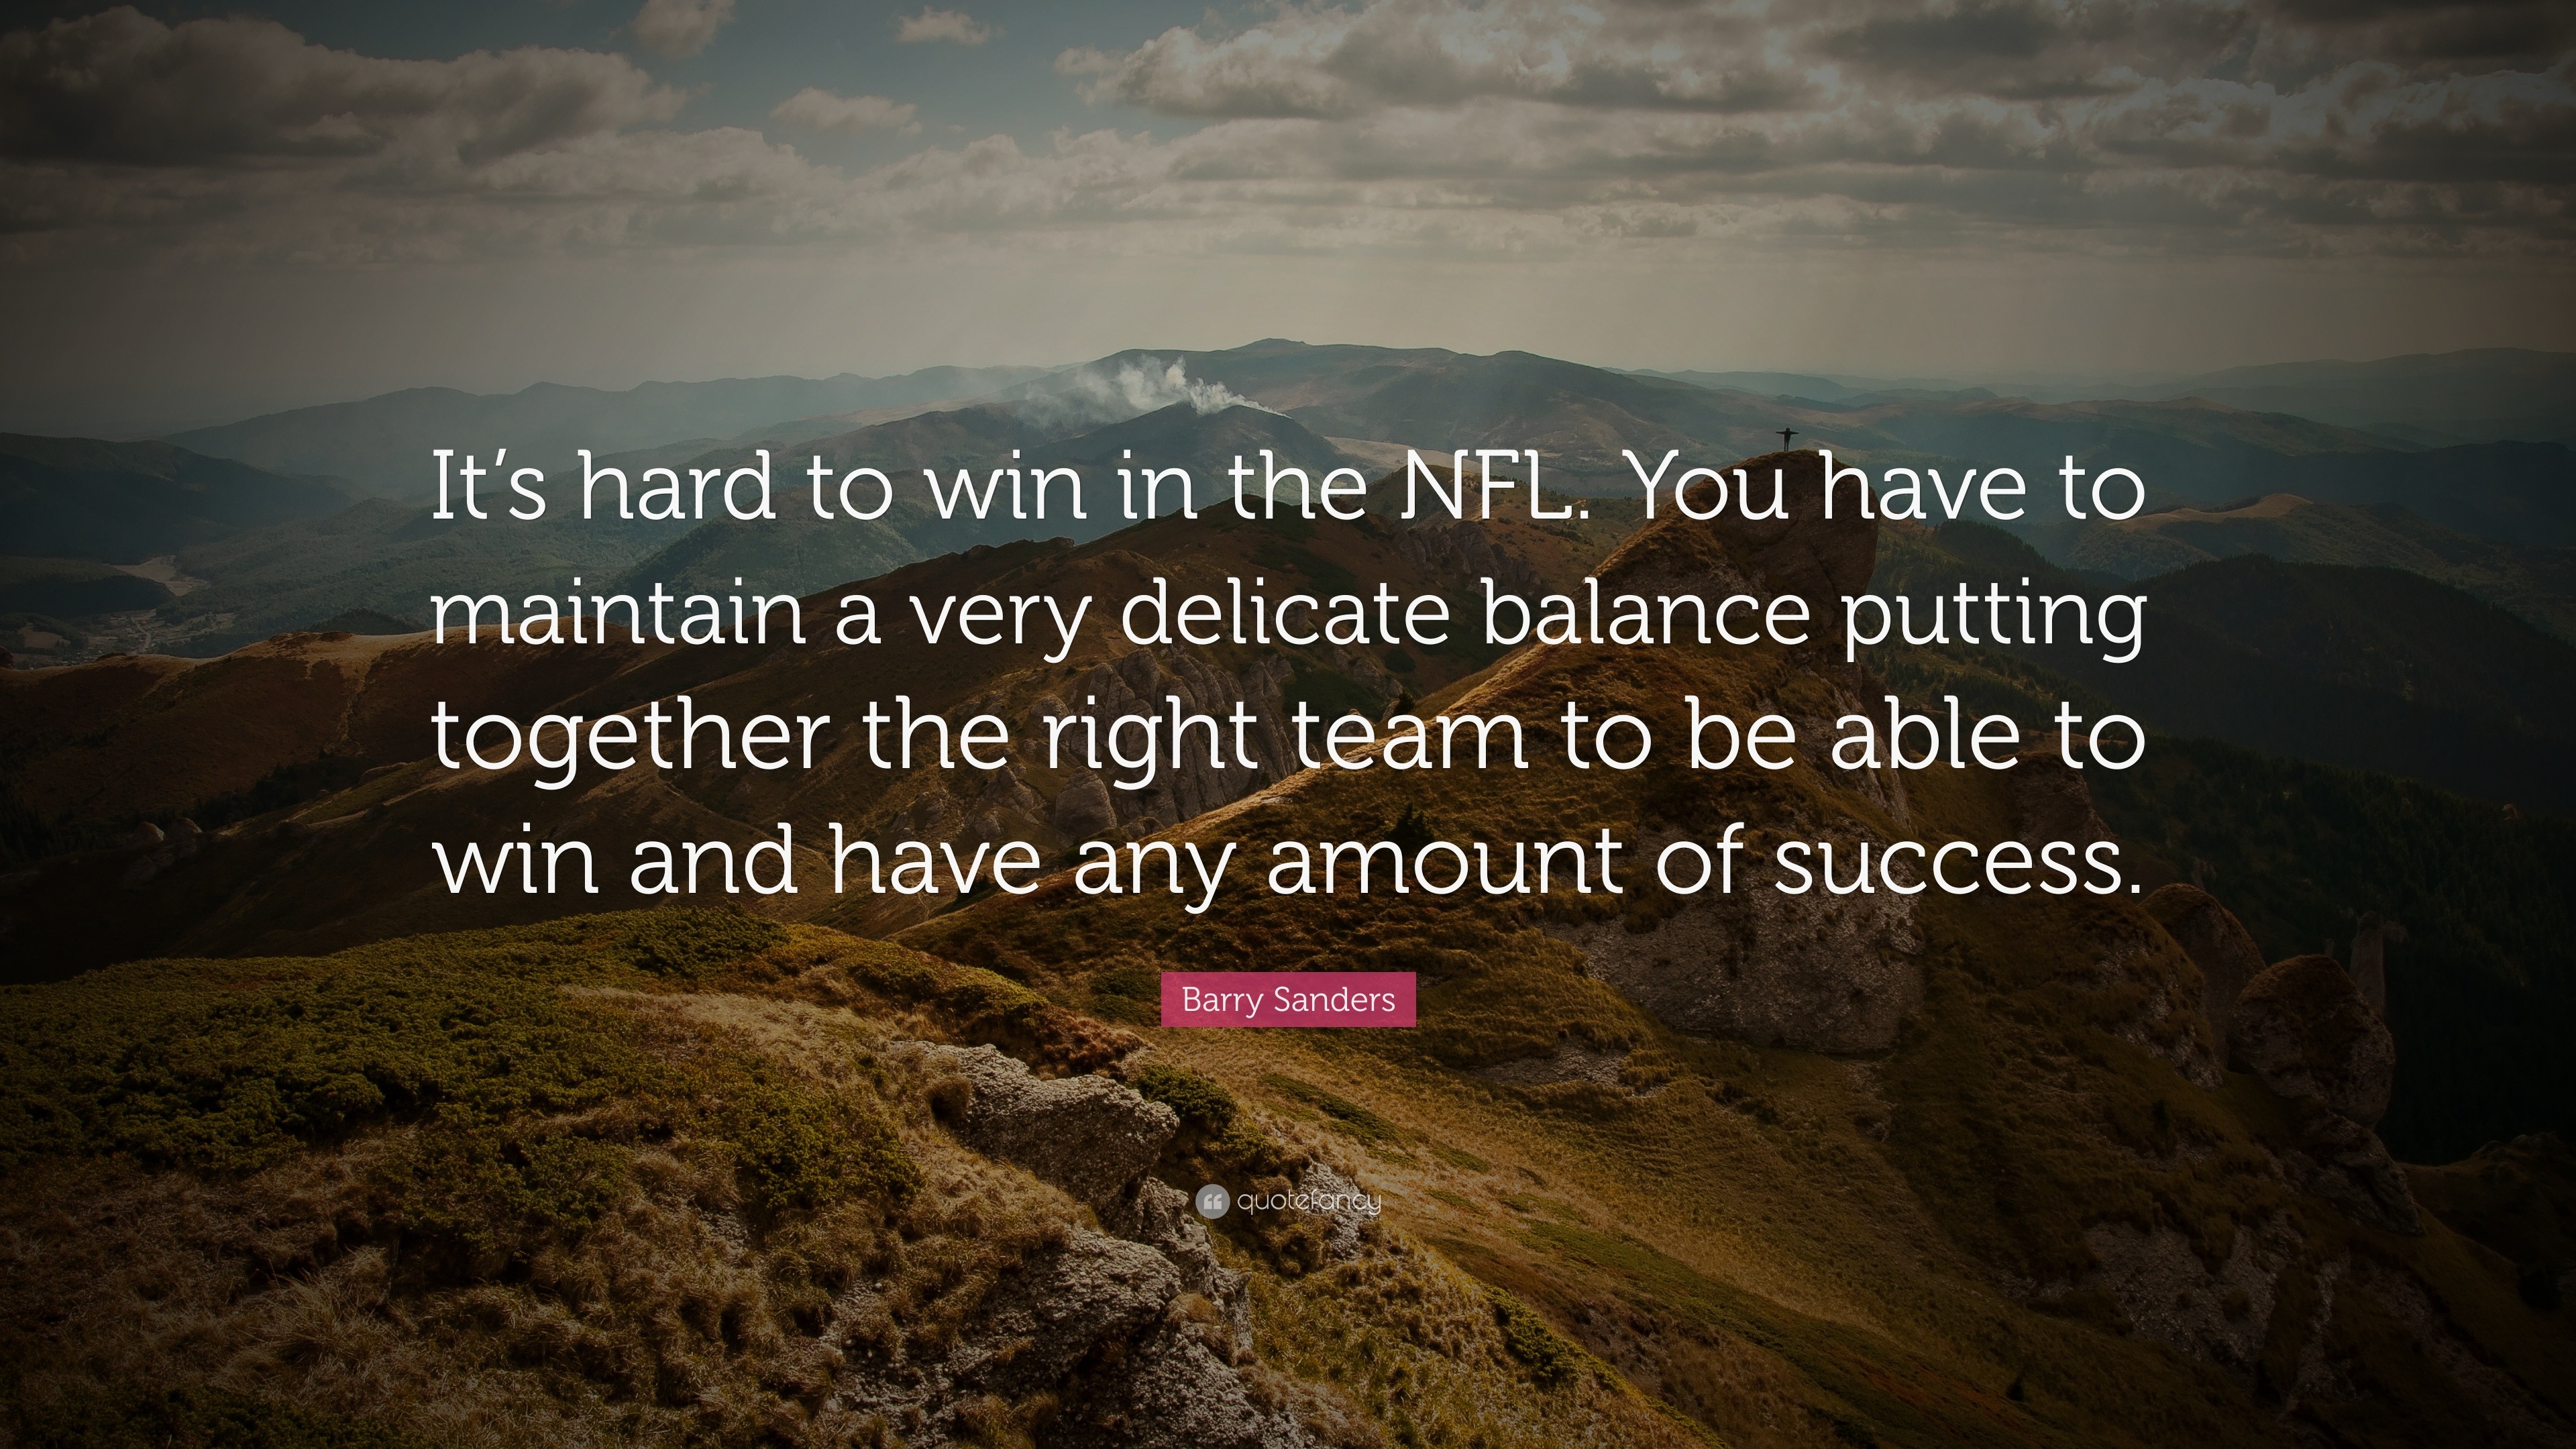 Barry Sanders Quote: "It's hard to win in the NFL. You have to maintain a very delicate balance ...